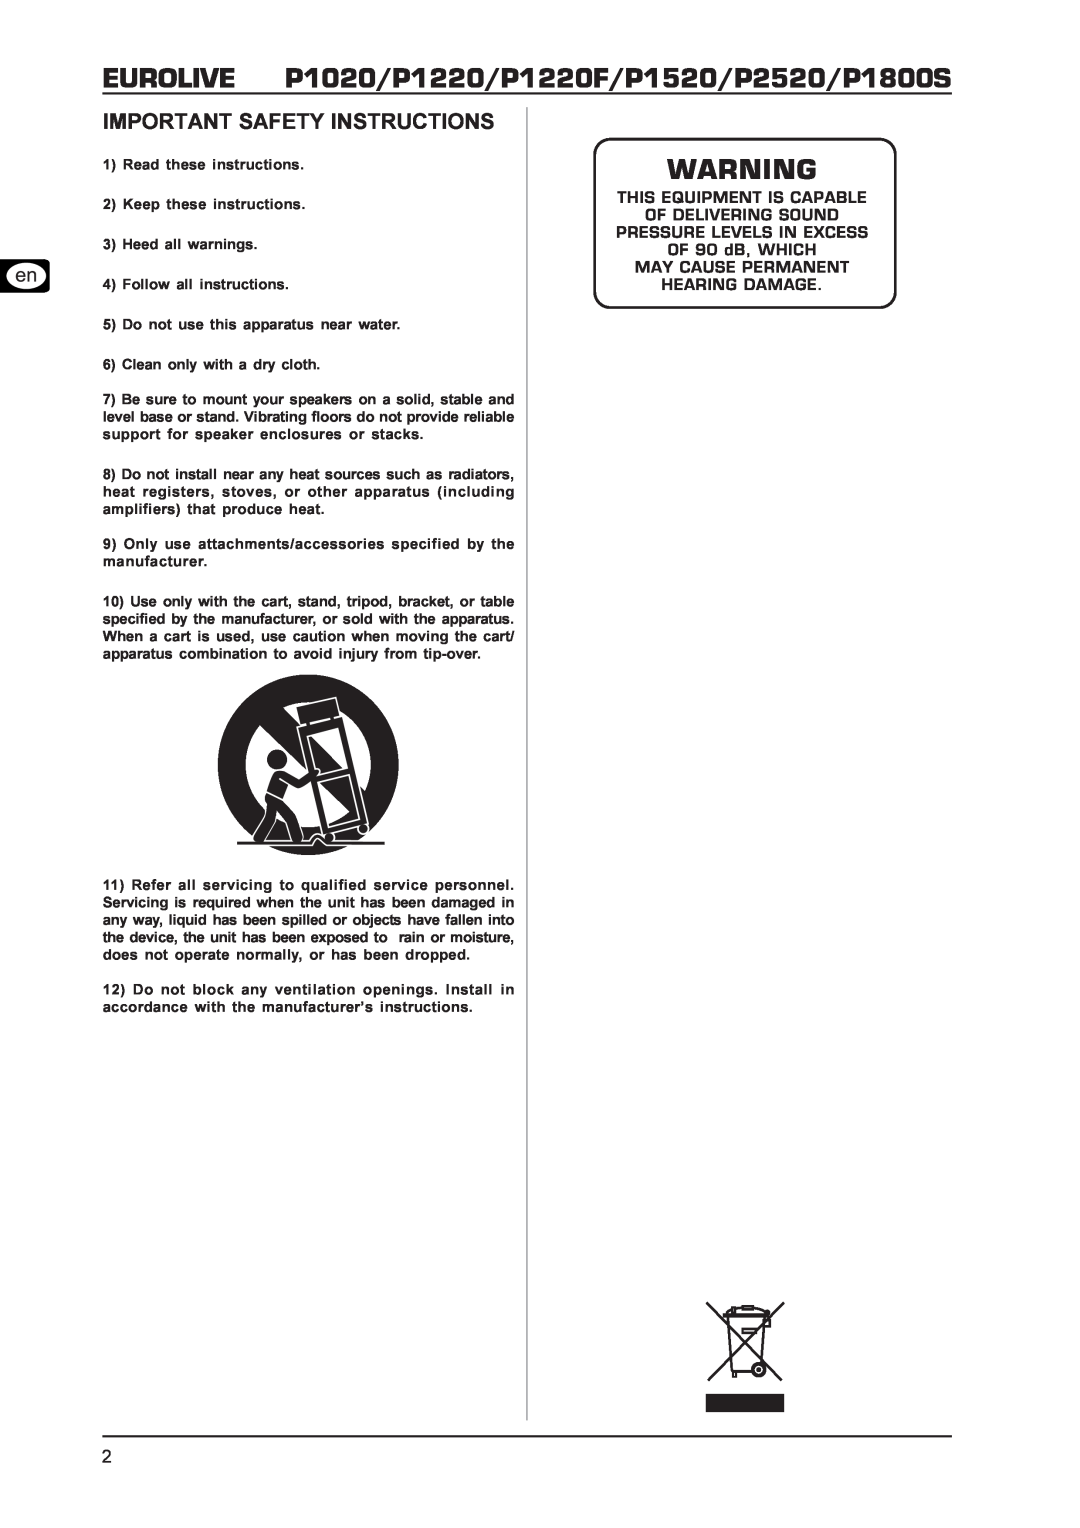 Behringer user manual EUROLIVE P1020/P1220/P1220F/P1520/P2520/P1800S, Important Safety Instructions 